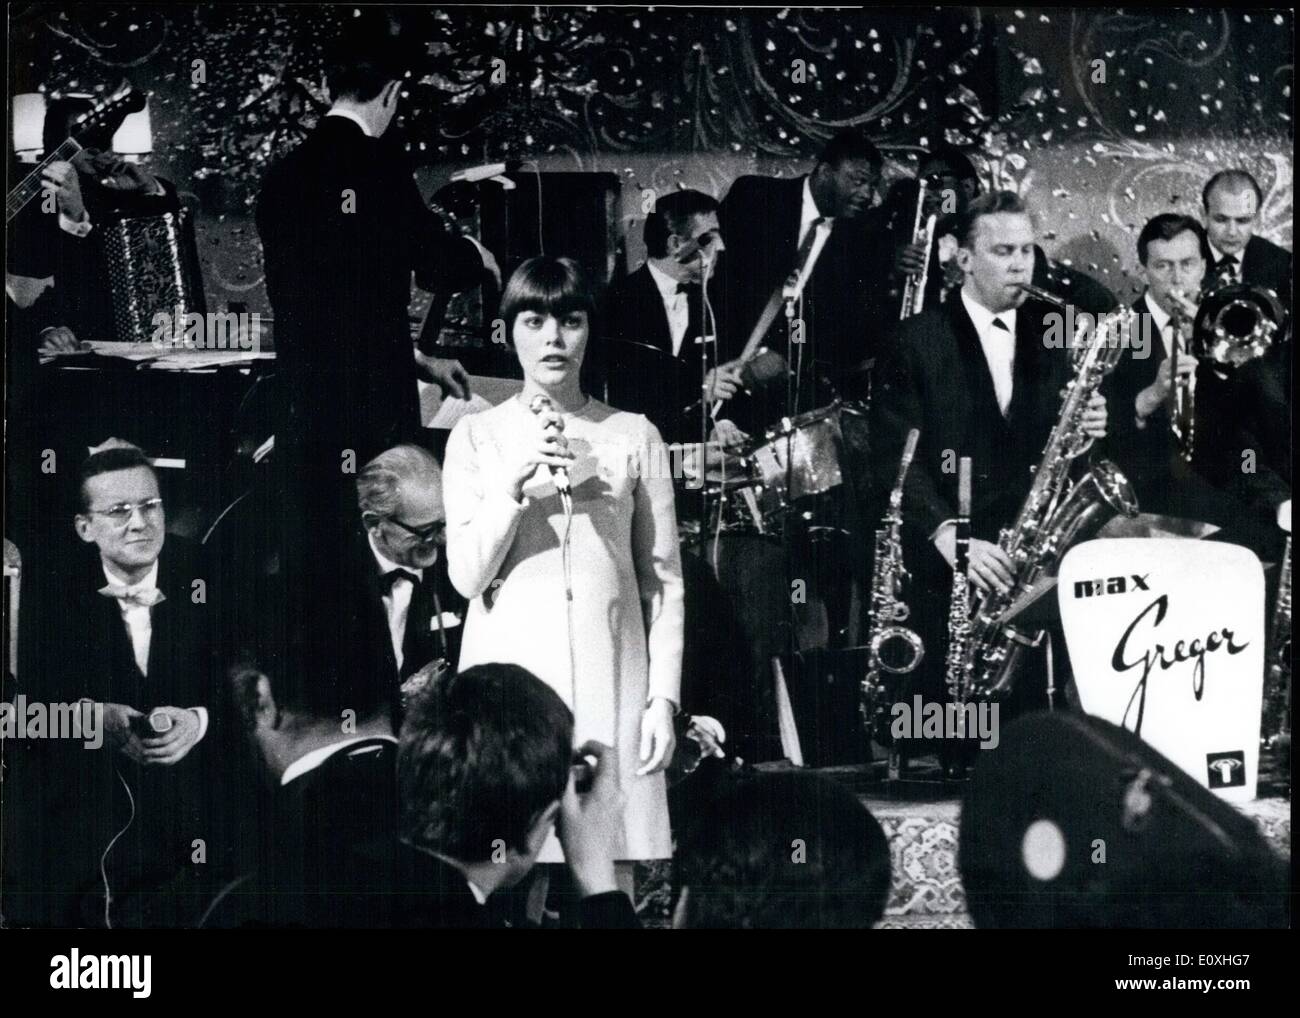 Jan. 01, 1967 - Carnival in Munich: One of the most important carnival- festivals of the german carnival took place on January 21. in Munich. The stars of the brilliant night were the famous ''queen of Jazz'' Ella FITZGERALD with Duke Ellington and his band , and the ''Little girl'' from Paris, MIREILLE Mathieu. More than one hundred stars all over the world were present. Picture shows MIREILLE Mathieu during her show. Stock Photo